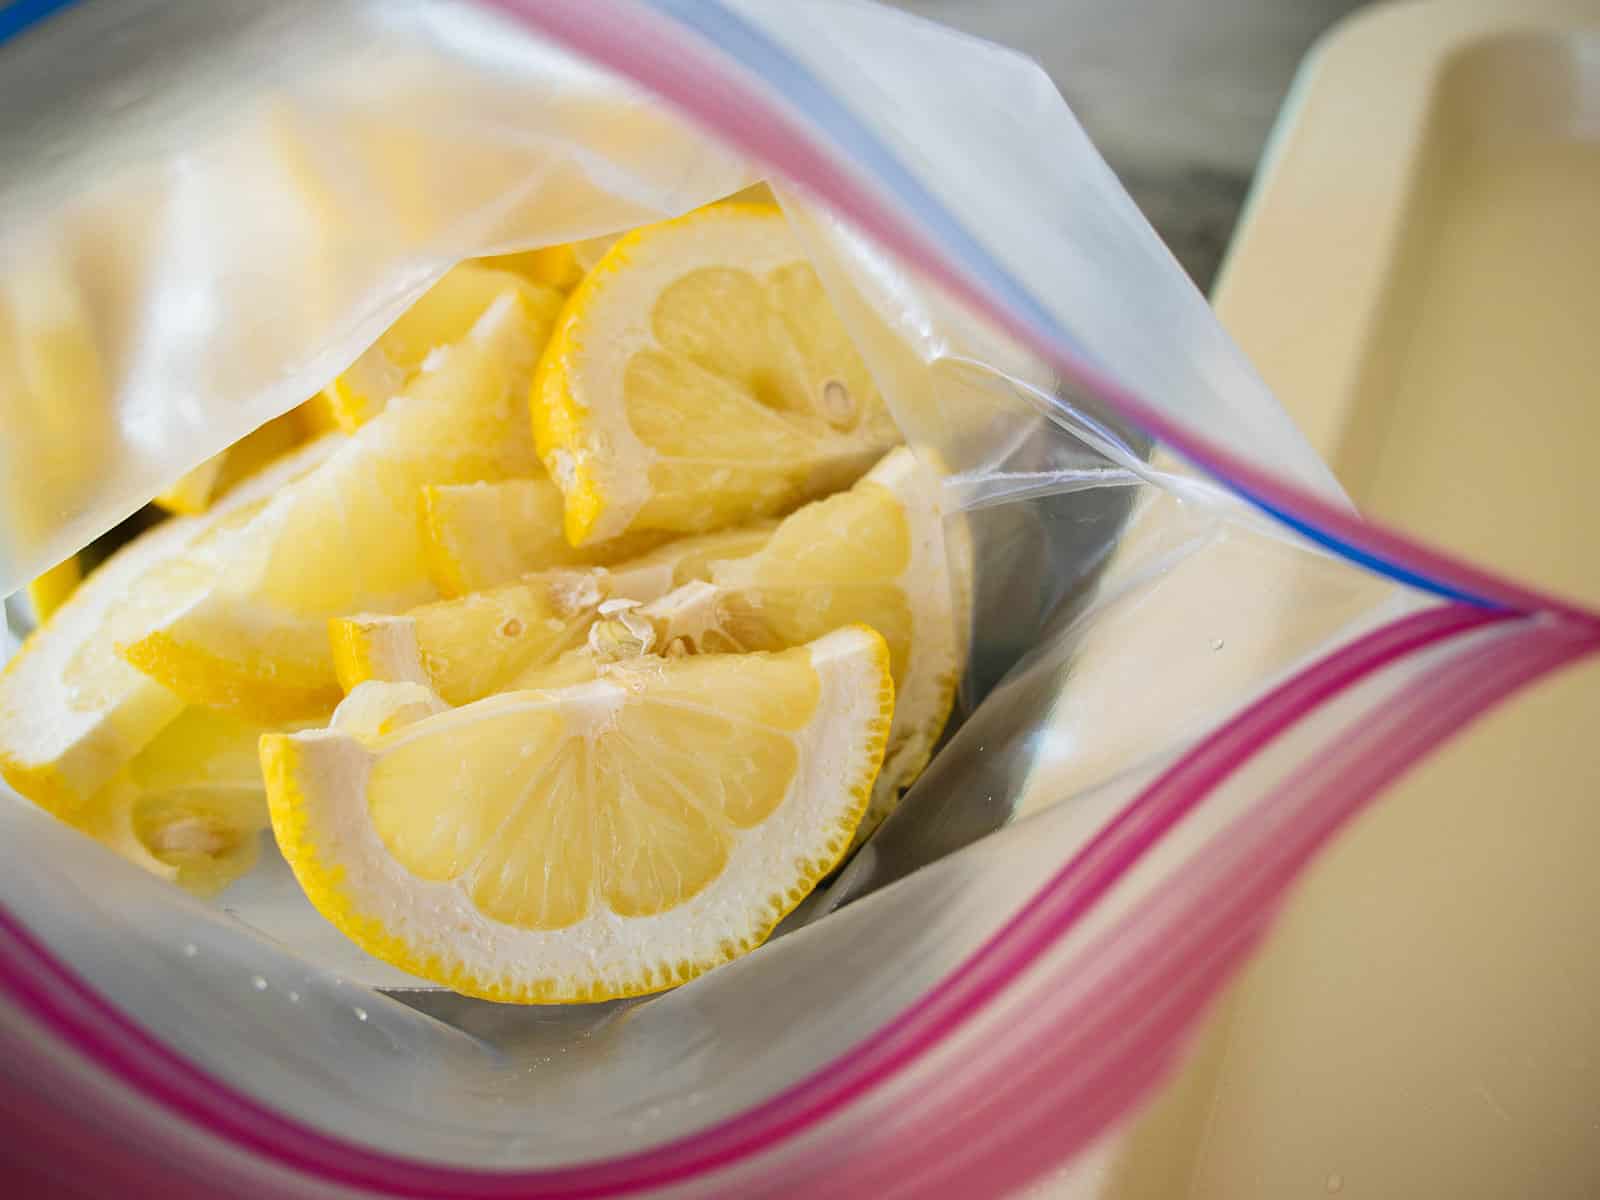 Frozen half slices of lemons in a plastic zip-top bag next to a cream-colored baking sheet